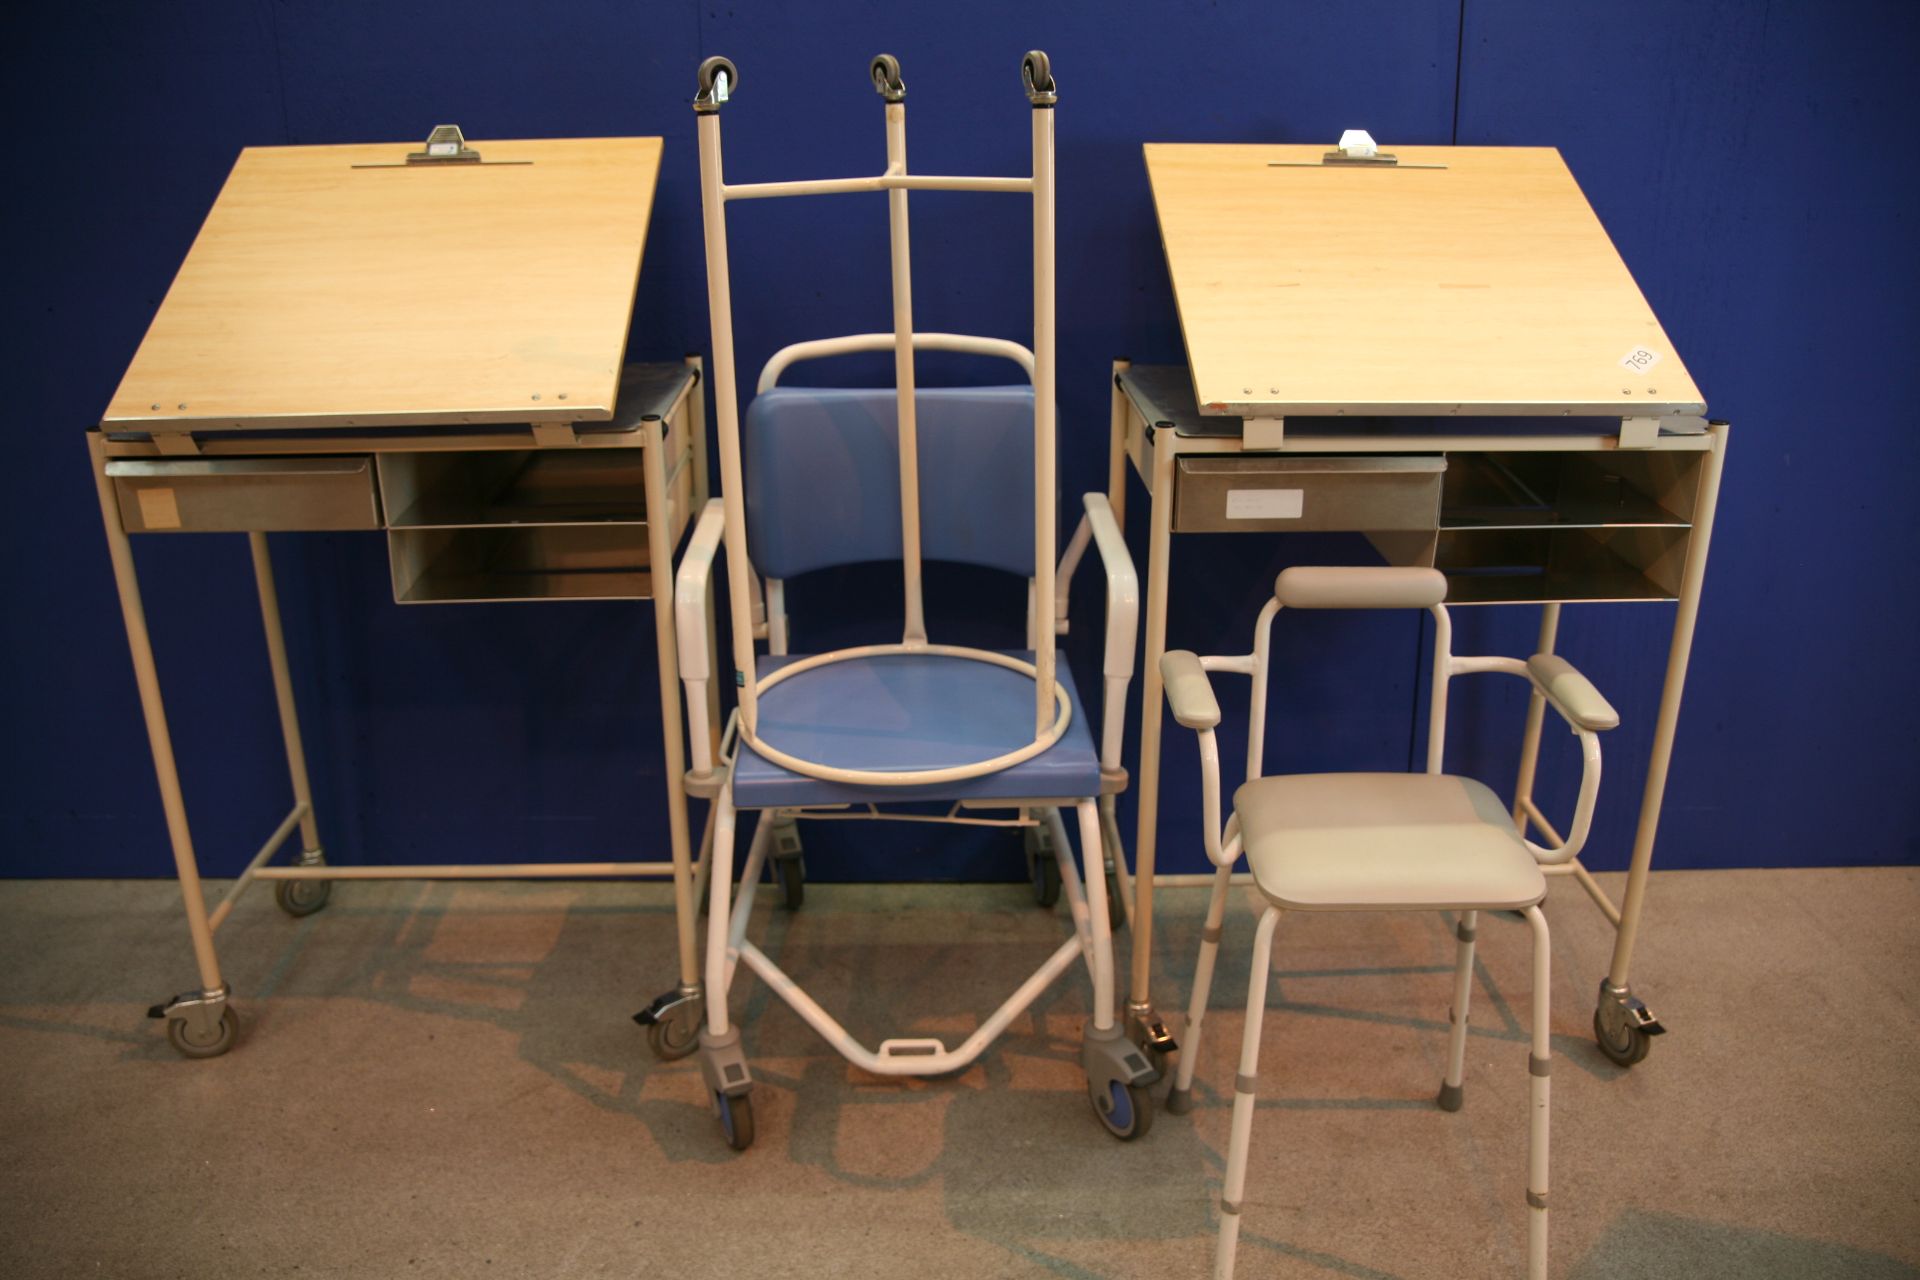 2x Mobile Chairs and 2x Mobile Trolley with Built In Clipboard